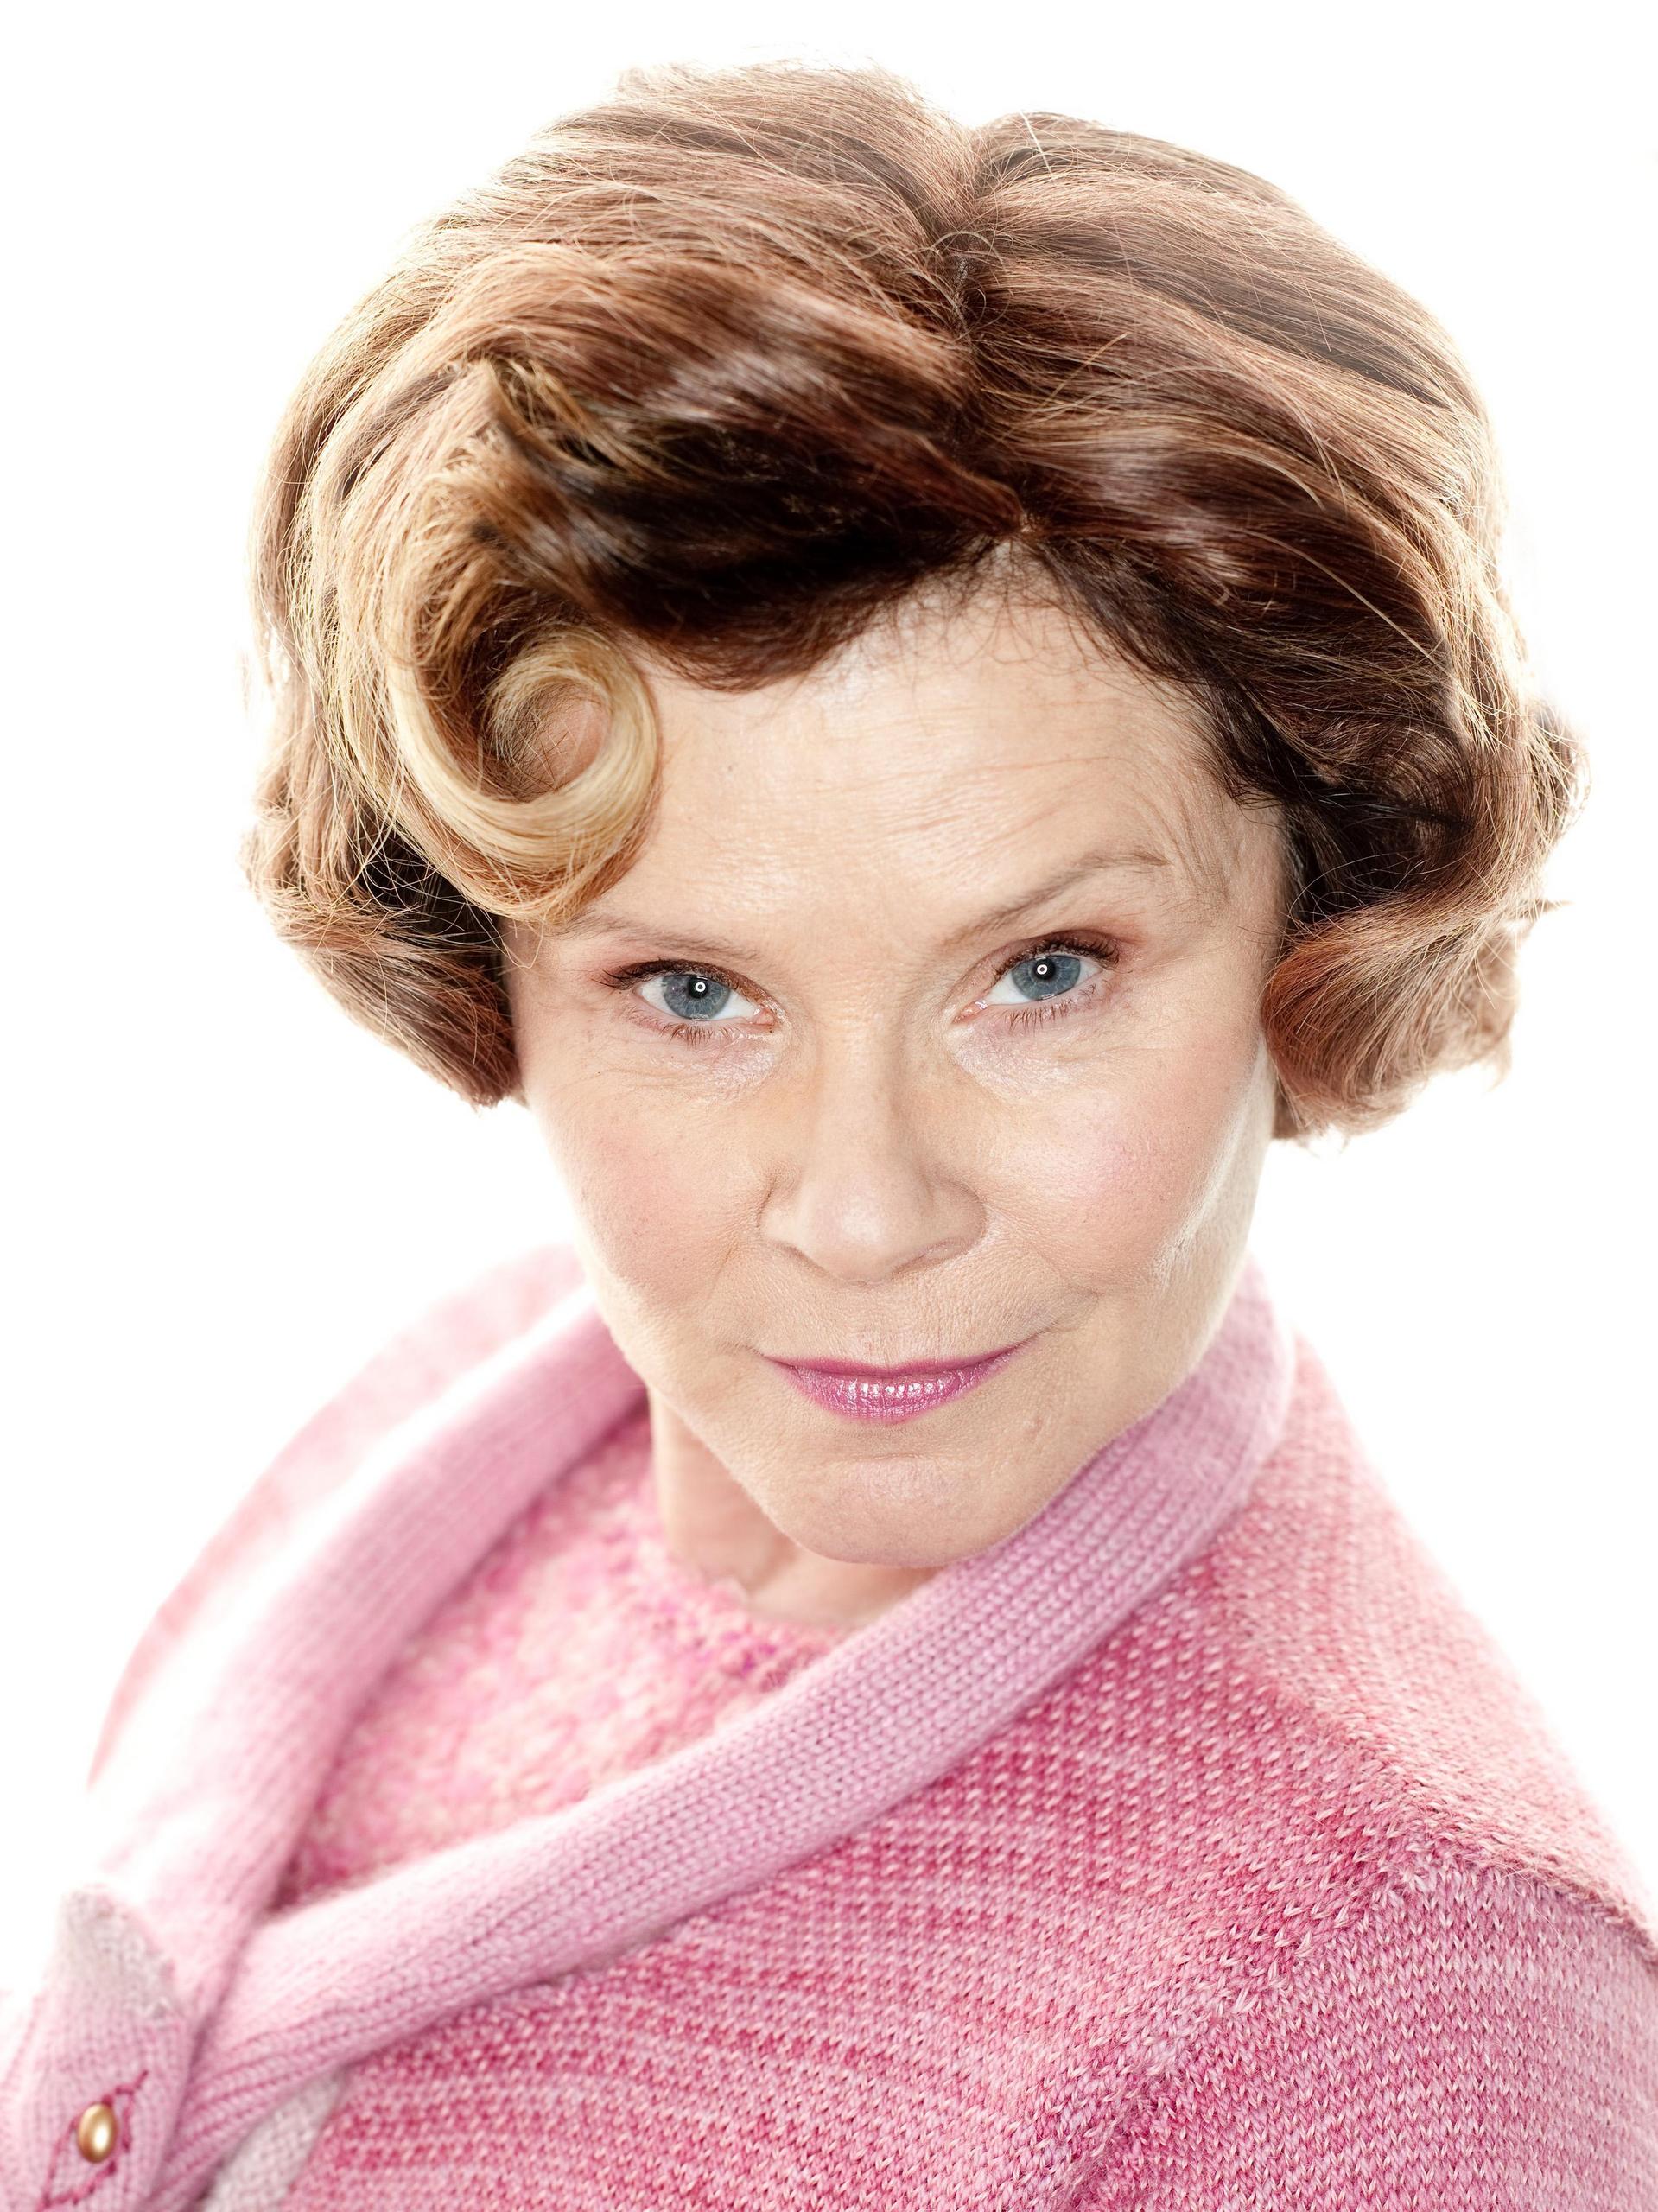 Umbridge - Harry Potter and the Deathly Hallows Movies Photo (17179848) - Fanpop